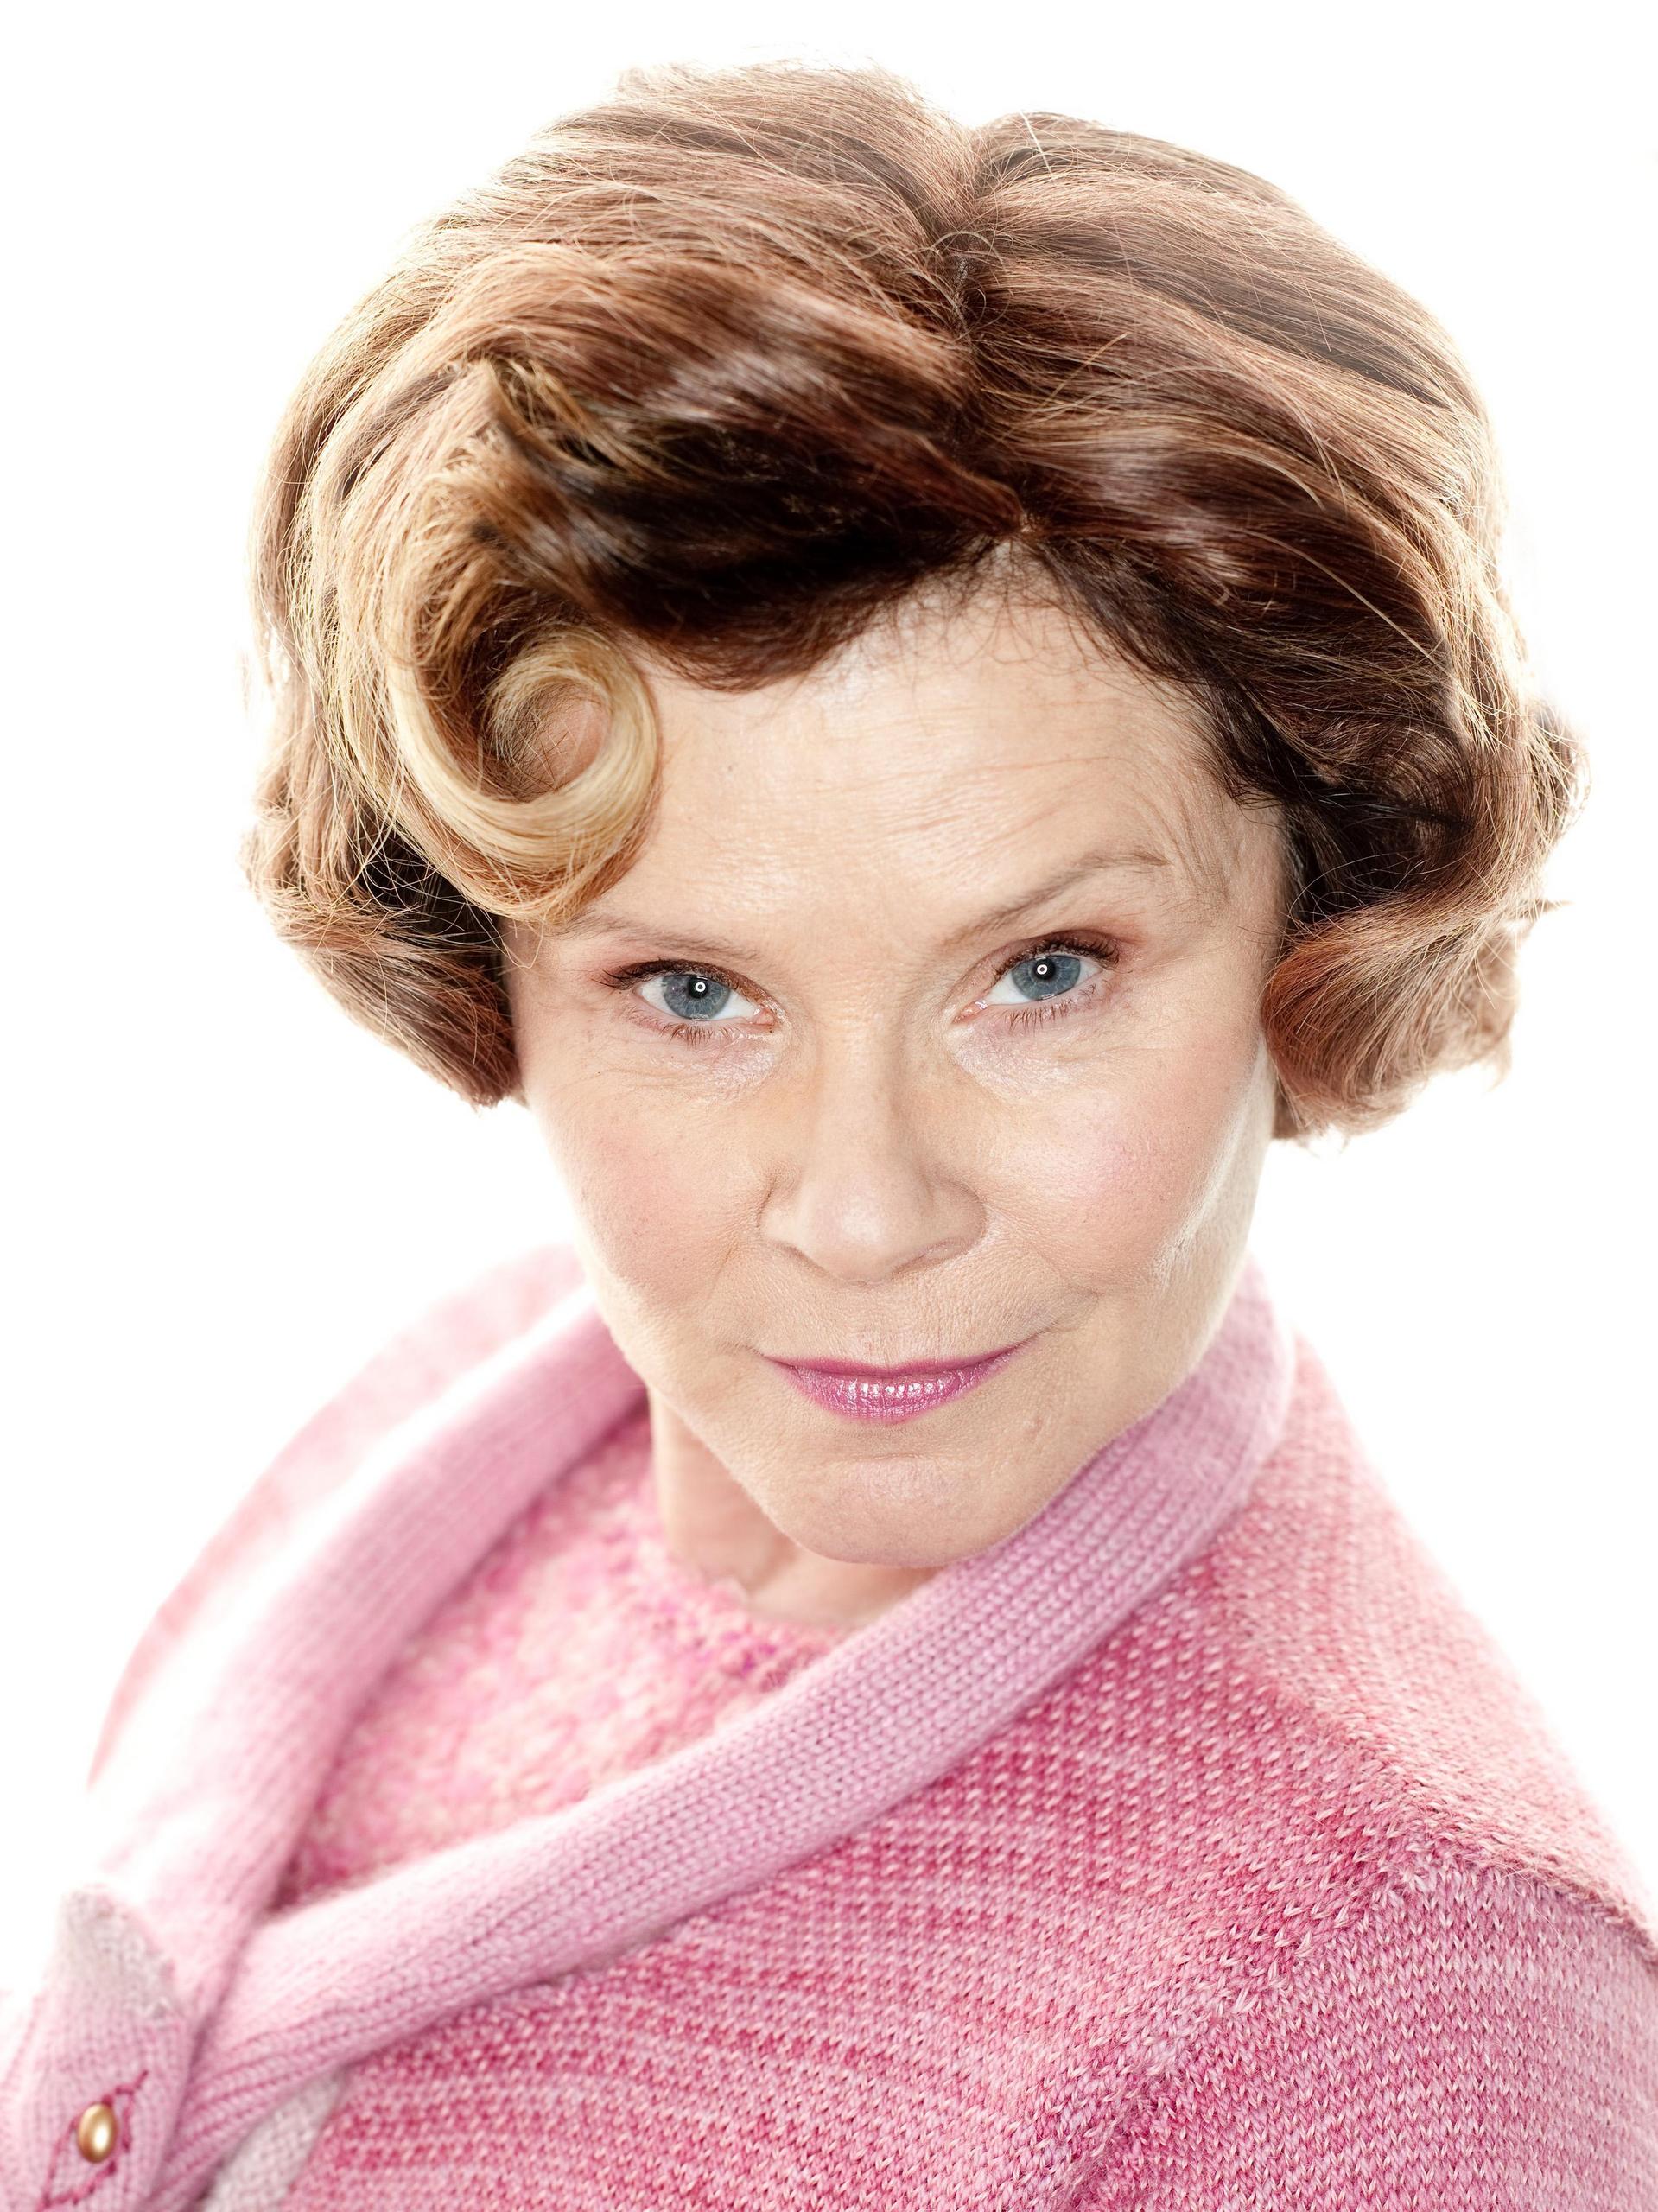 Umbridge - Harry Potter and the Deathly Hallows Movies Photo (17179848) - Fanpop